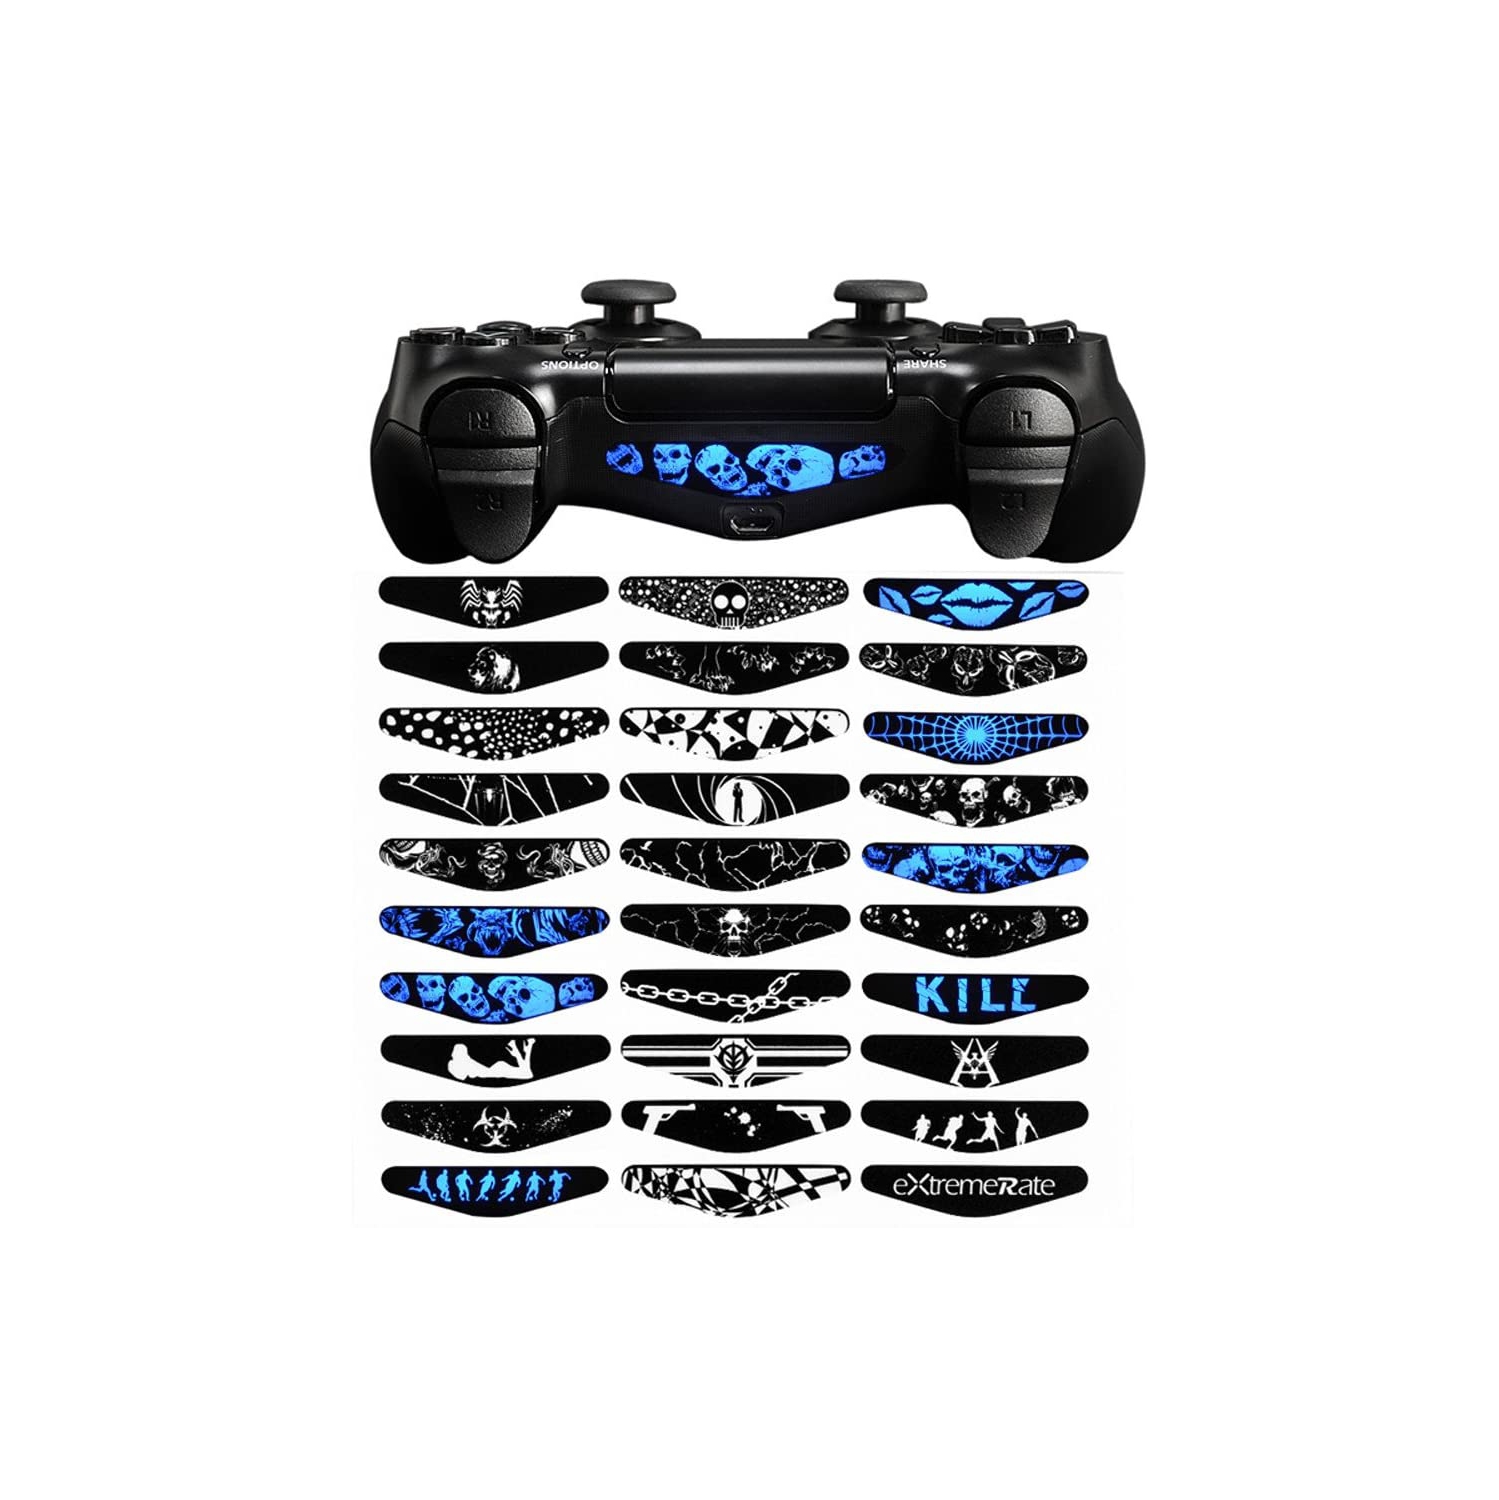 Led Lightbar Cover Light Bar Decals Stickers for Playstation 4 PS4 PS4 Slim PS4 Pro Controller Skins